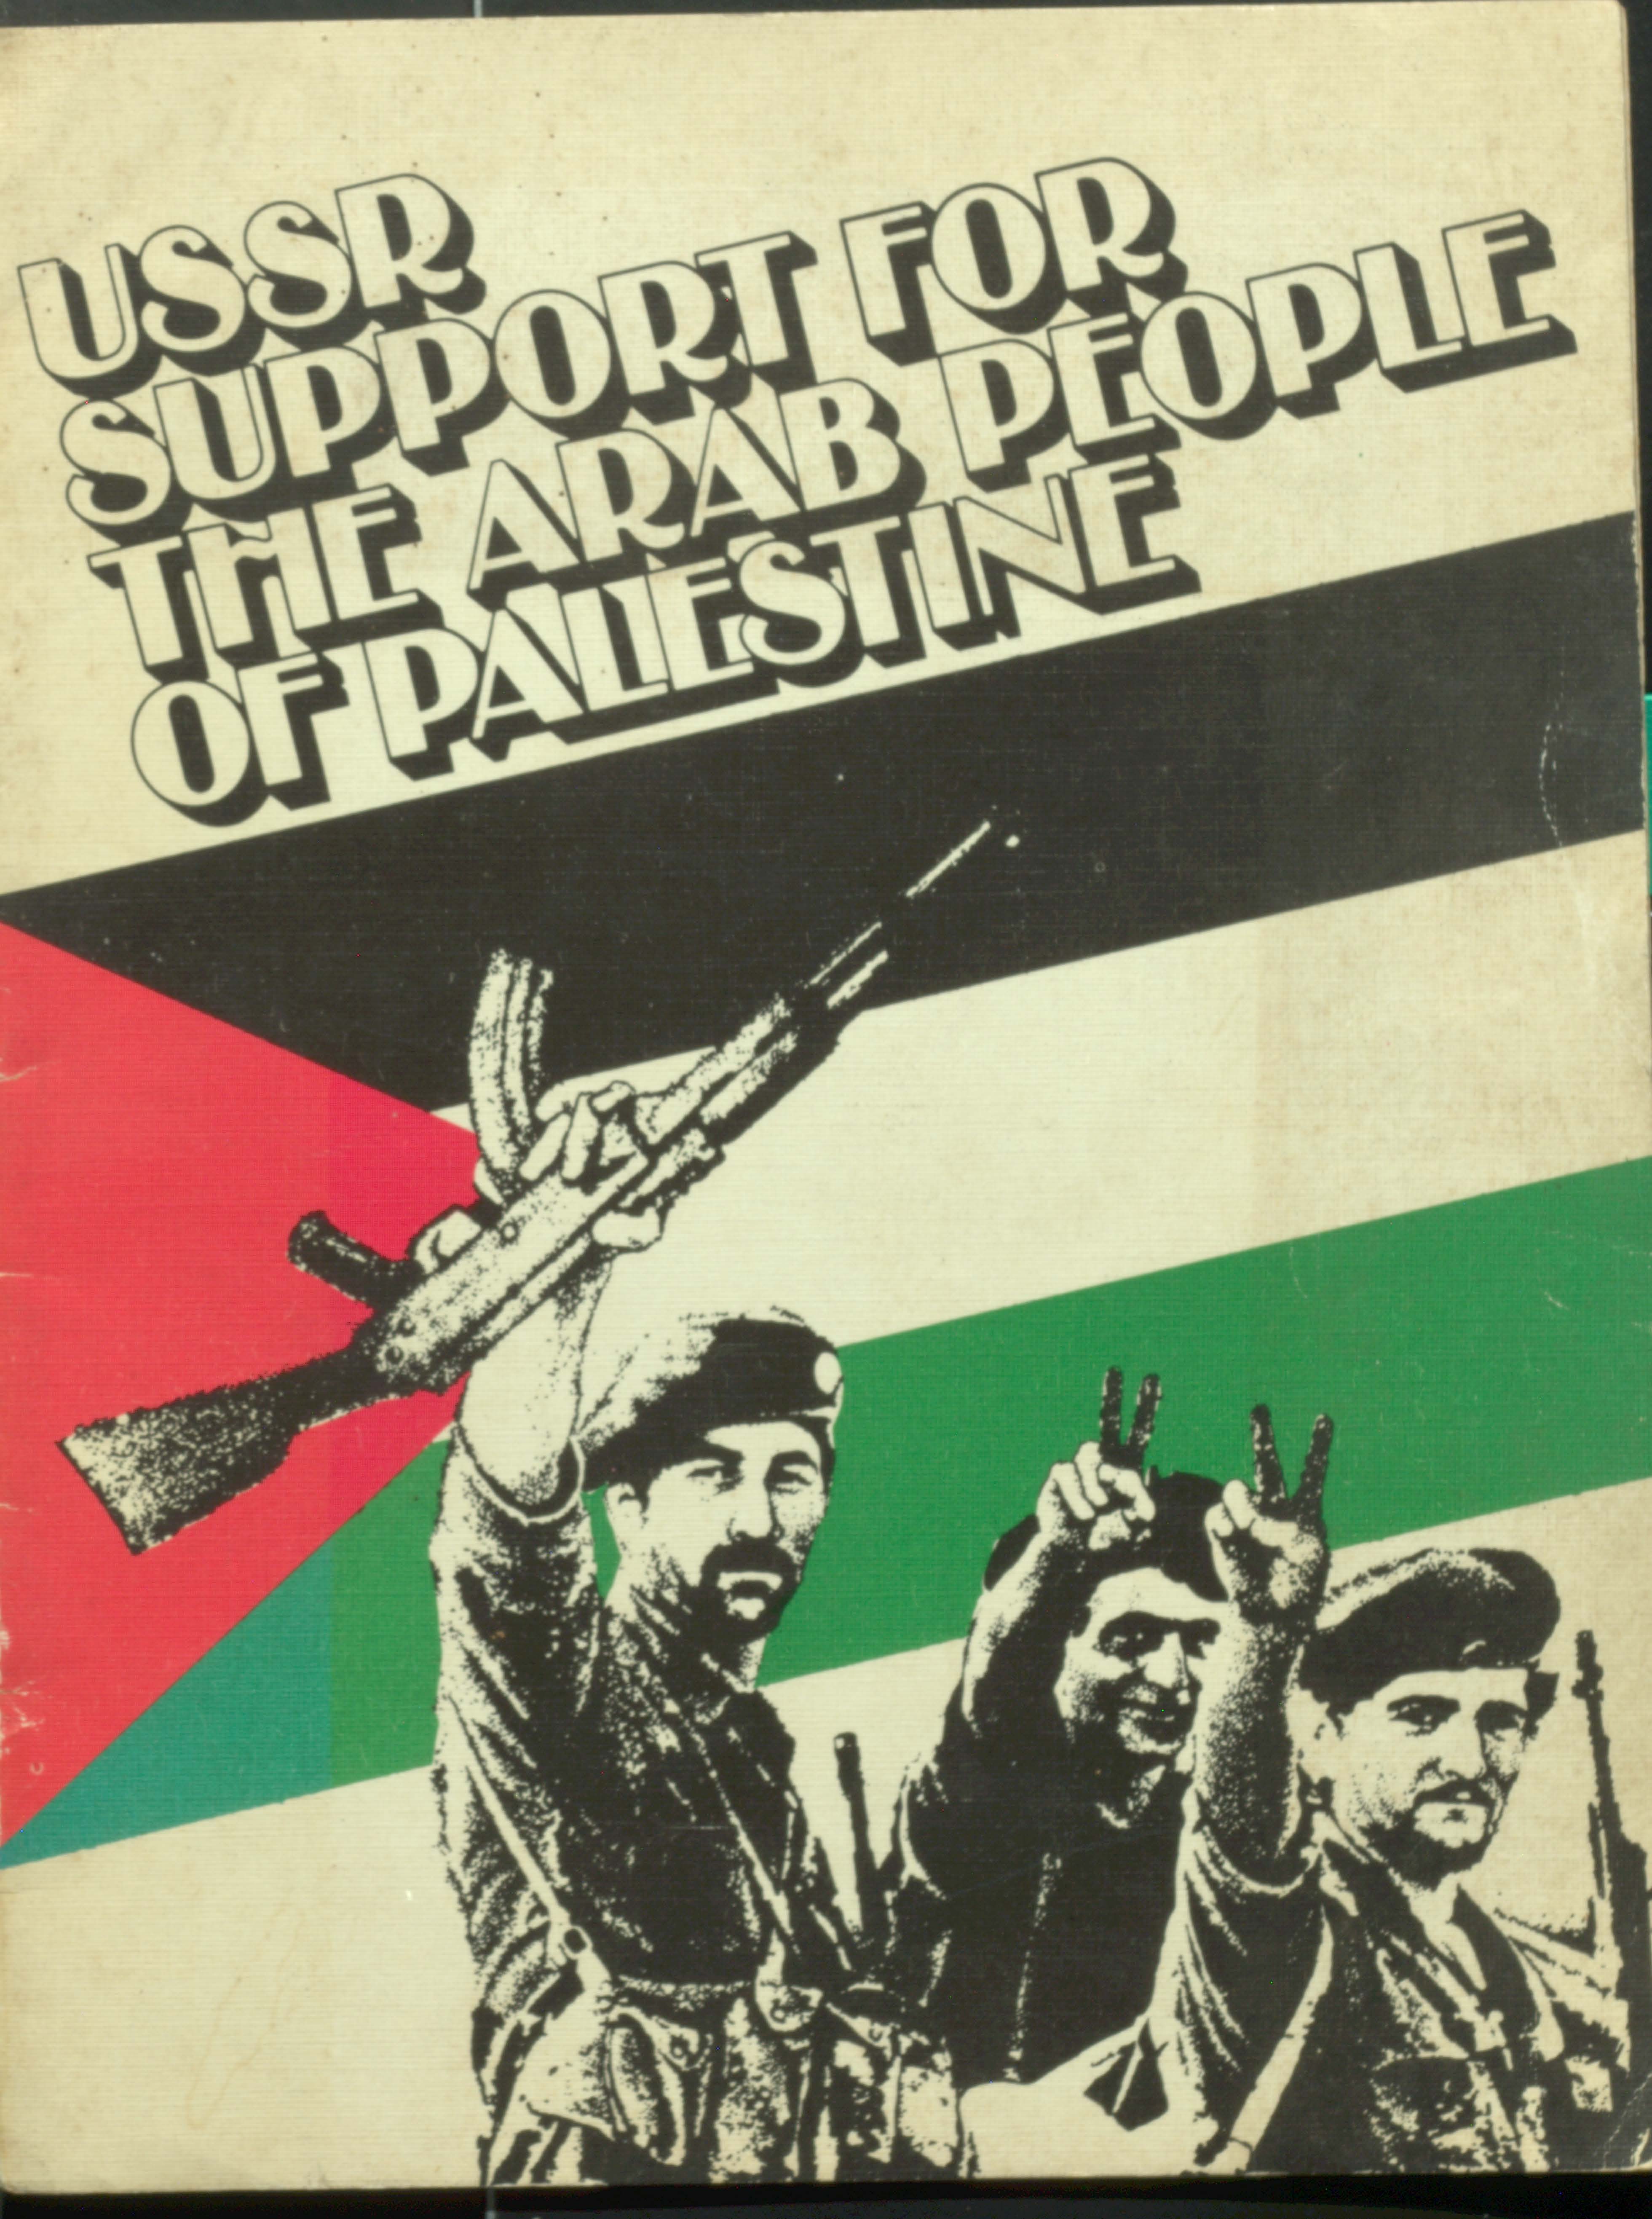 USSR support for the arab peopie of palestine